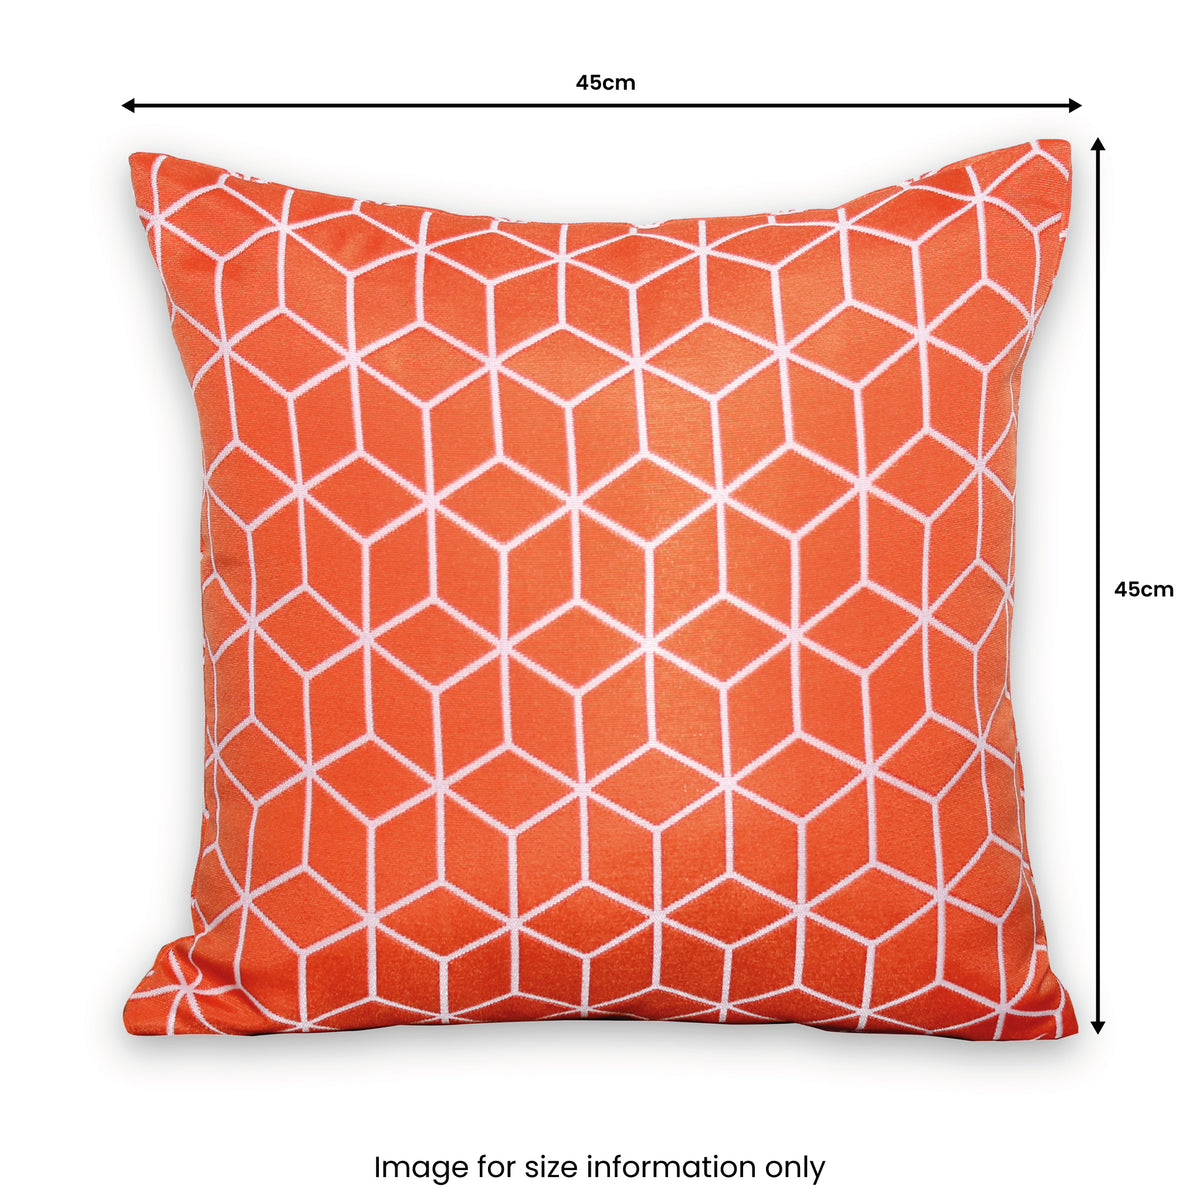 Outdoor Orange Geometric Scatter Cushion dimensions